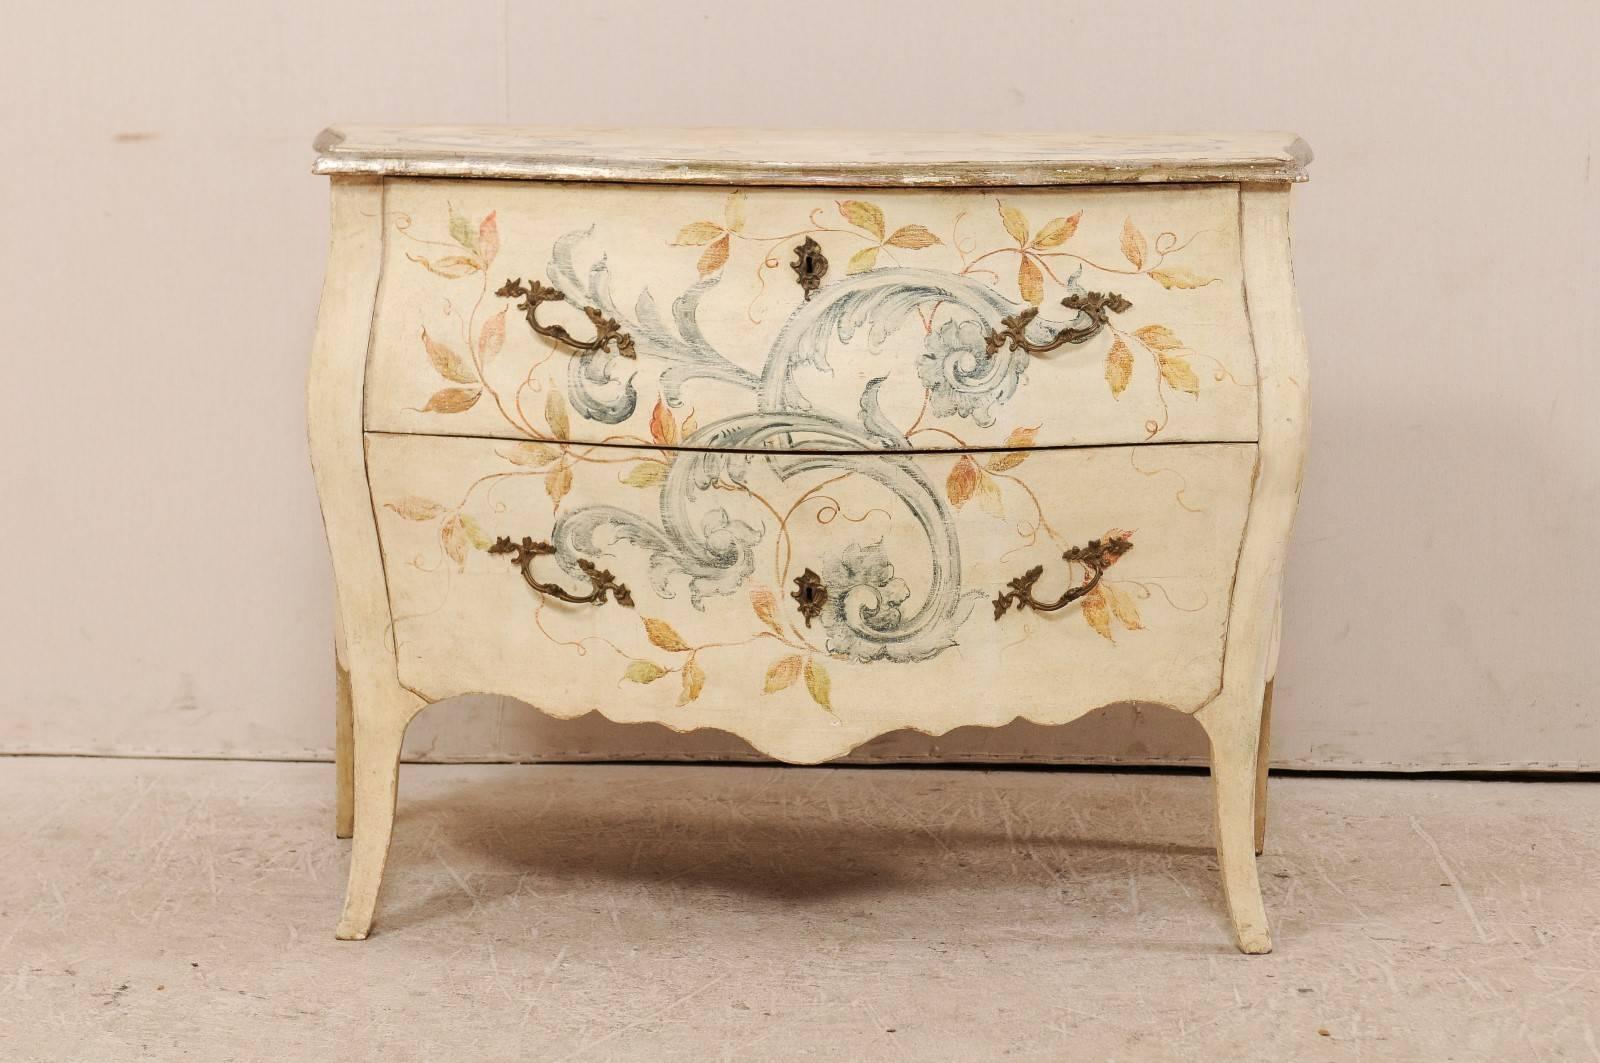 An early 20th century Italian two-drawer painted wood bombé chest. This Italian chest is ornately decorated in scrolling acanthus leaves and other foliage about the top, front and sides. The commode features two large sized drawers, with Rococo